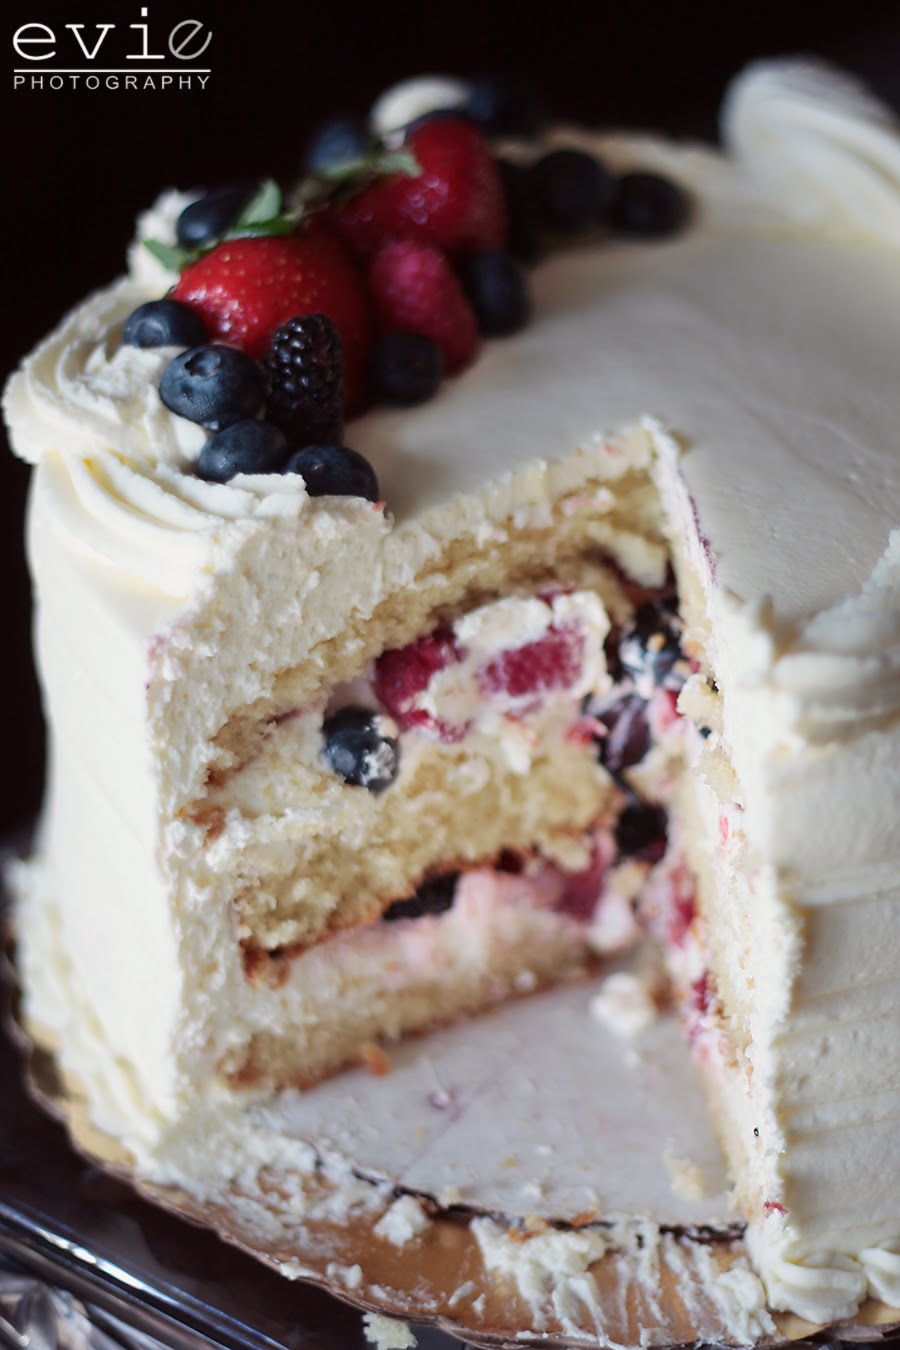 Evie Photography: I Dig It: Whole Foods Berry Chantilly Cake